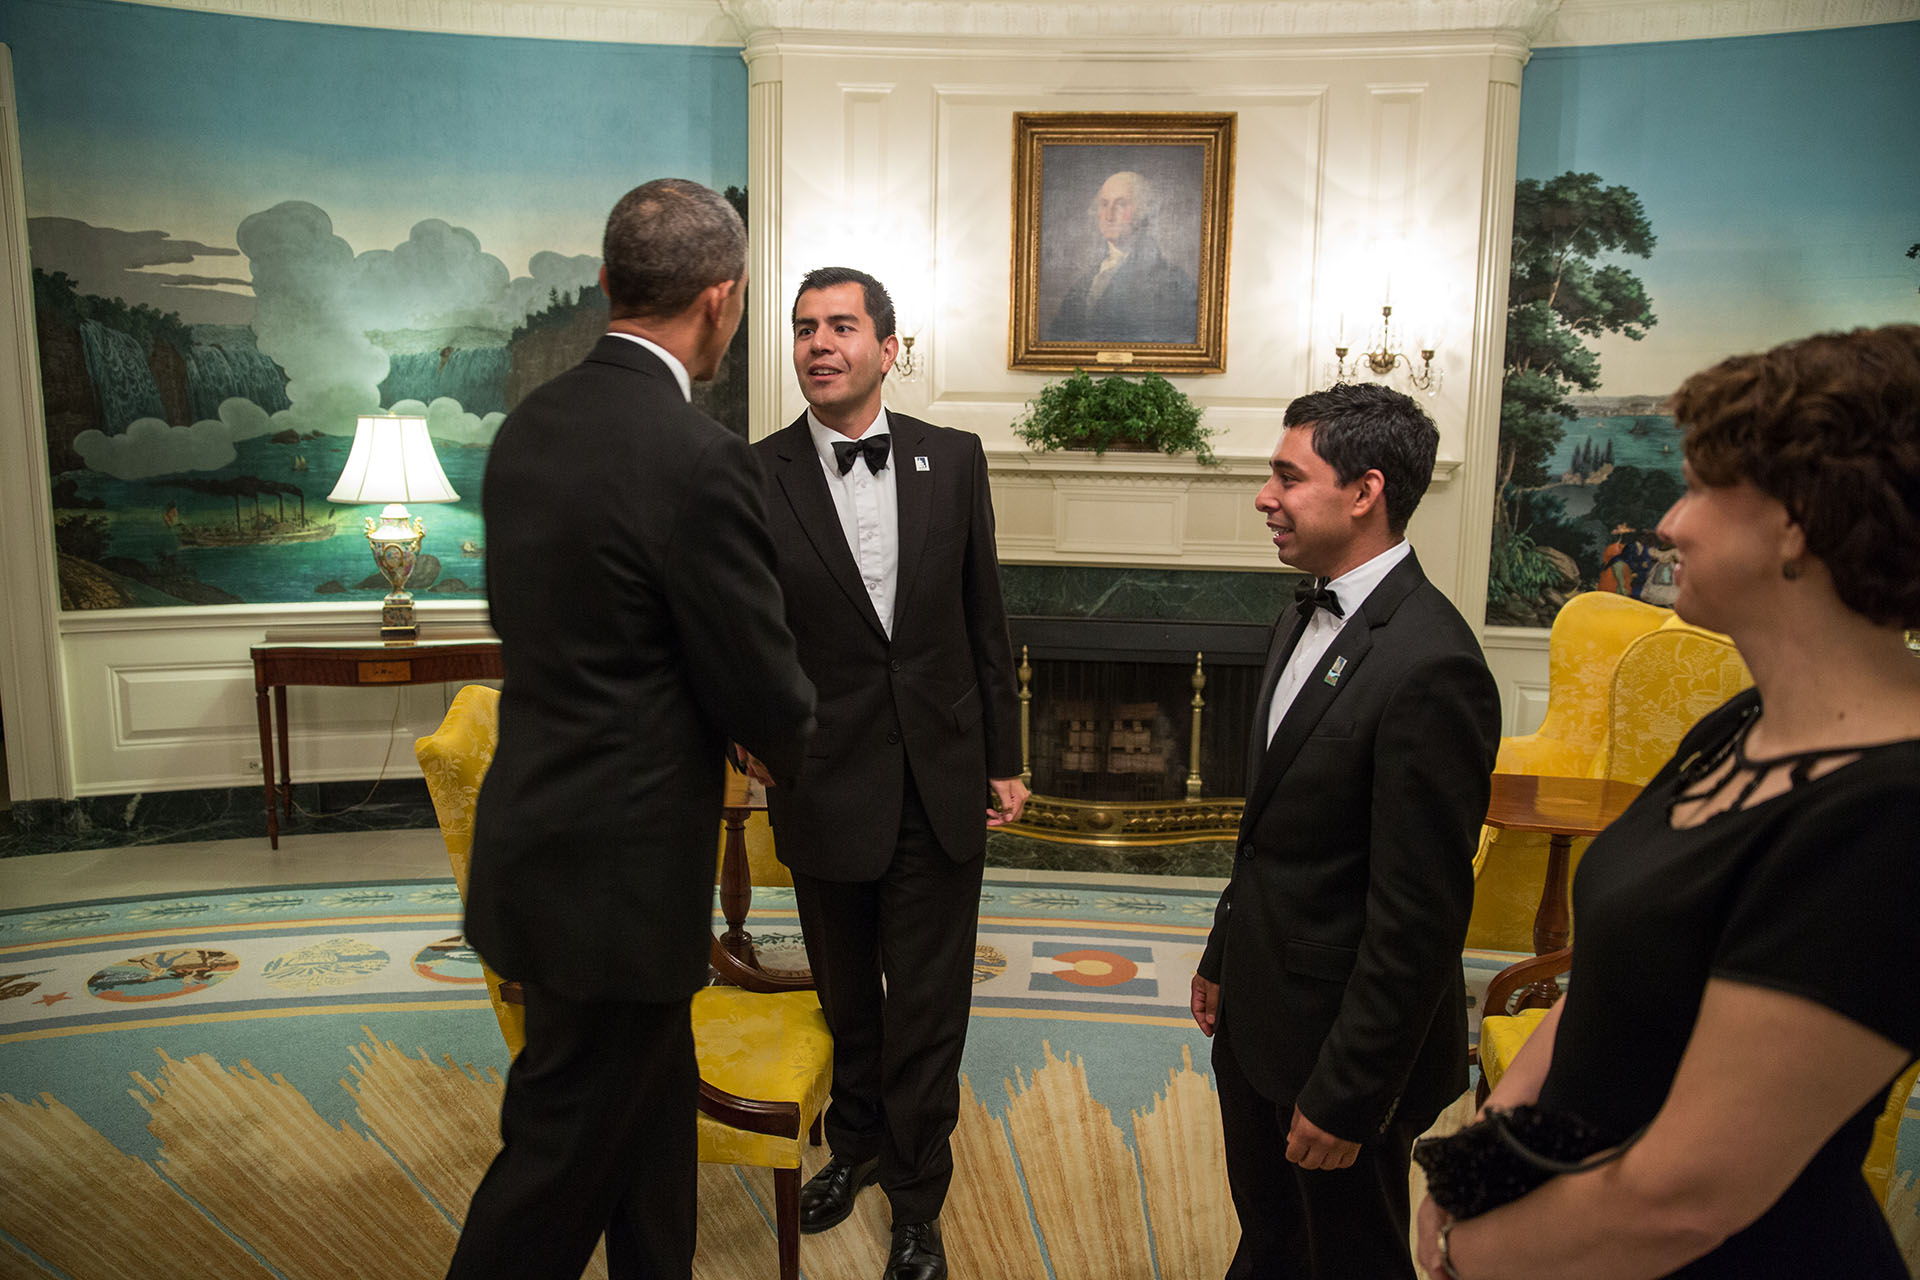 President Obama greets people in the Diplomatic Reception Room of the White House prior to the Congressional Hispanic Caucus Institute's 37th Annual Awards Gala